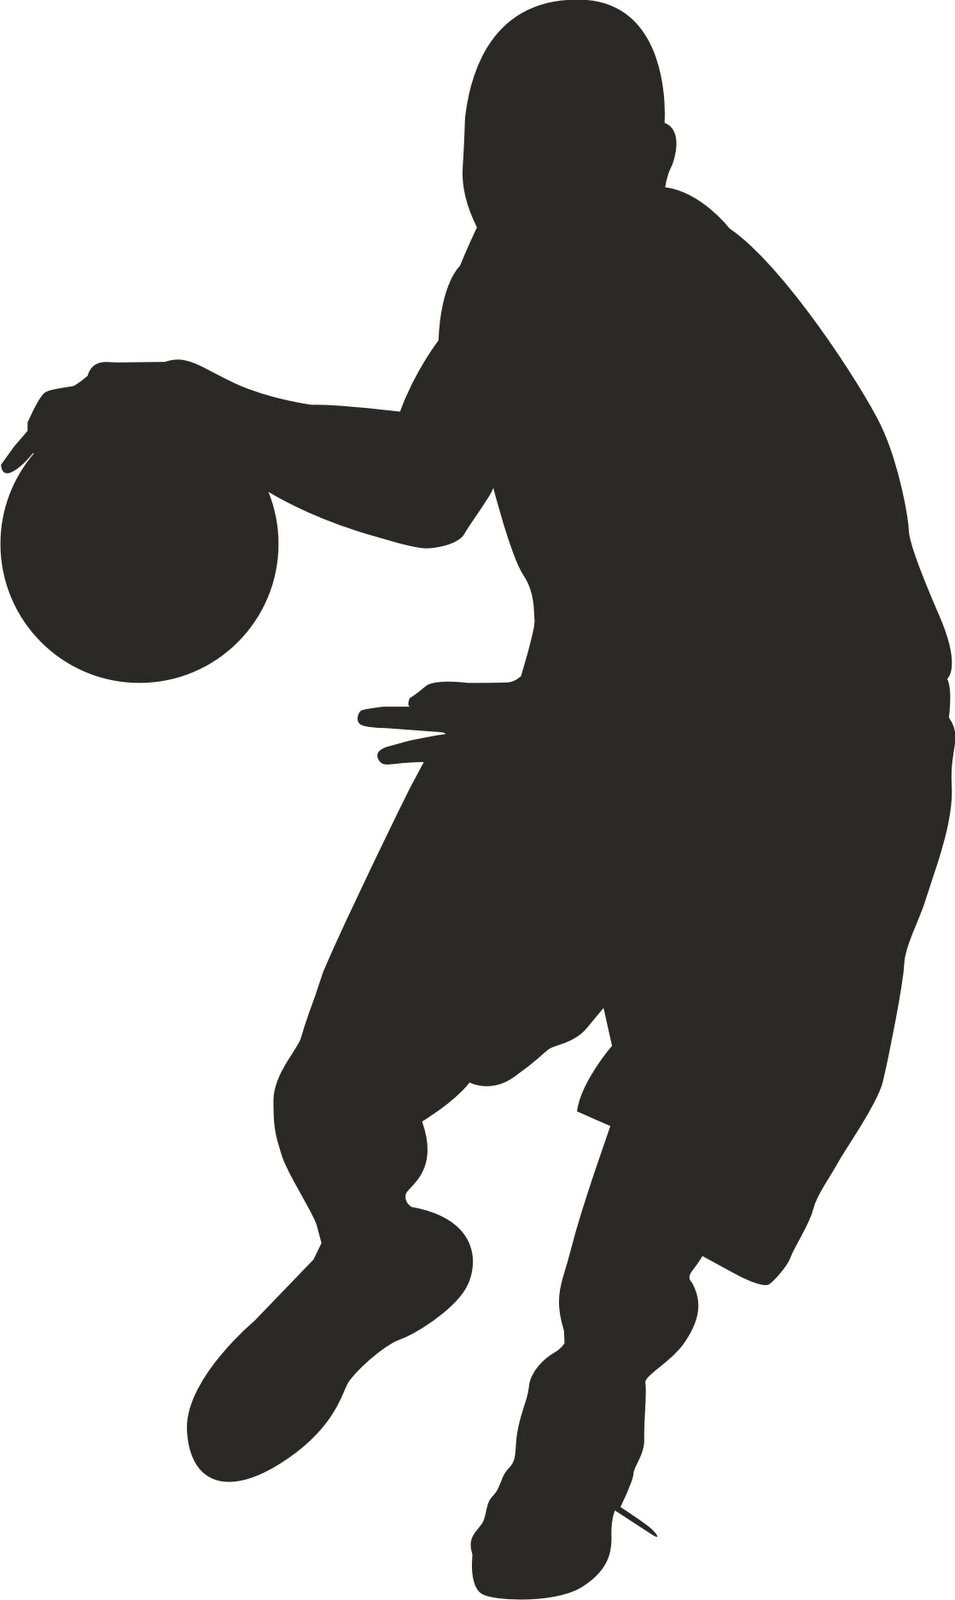 Basketball  black and white basketball player clipart black and white free 9